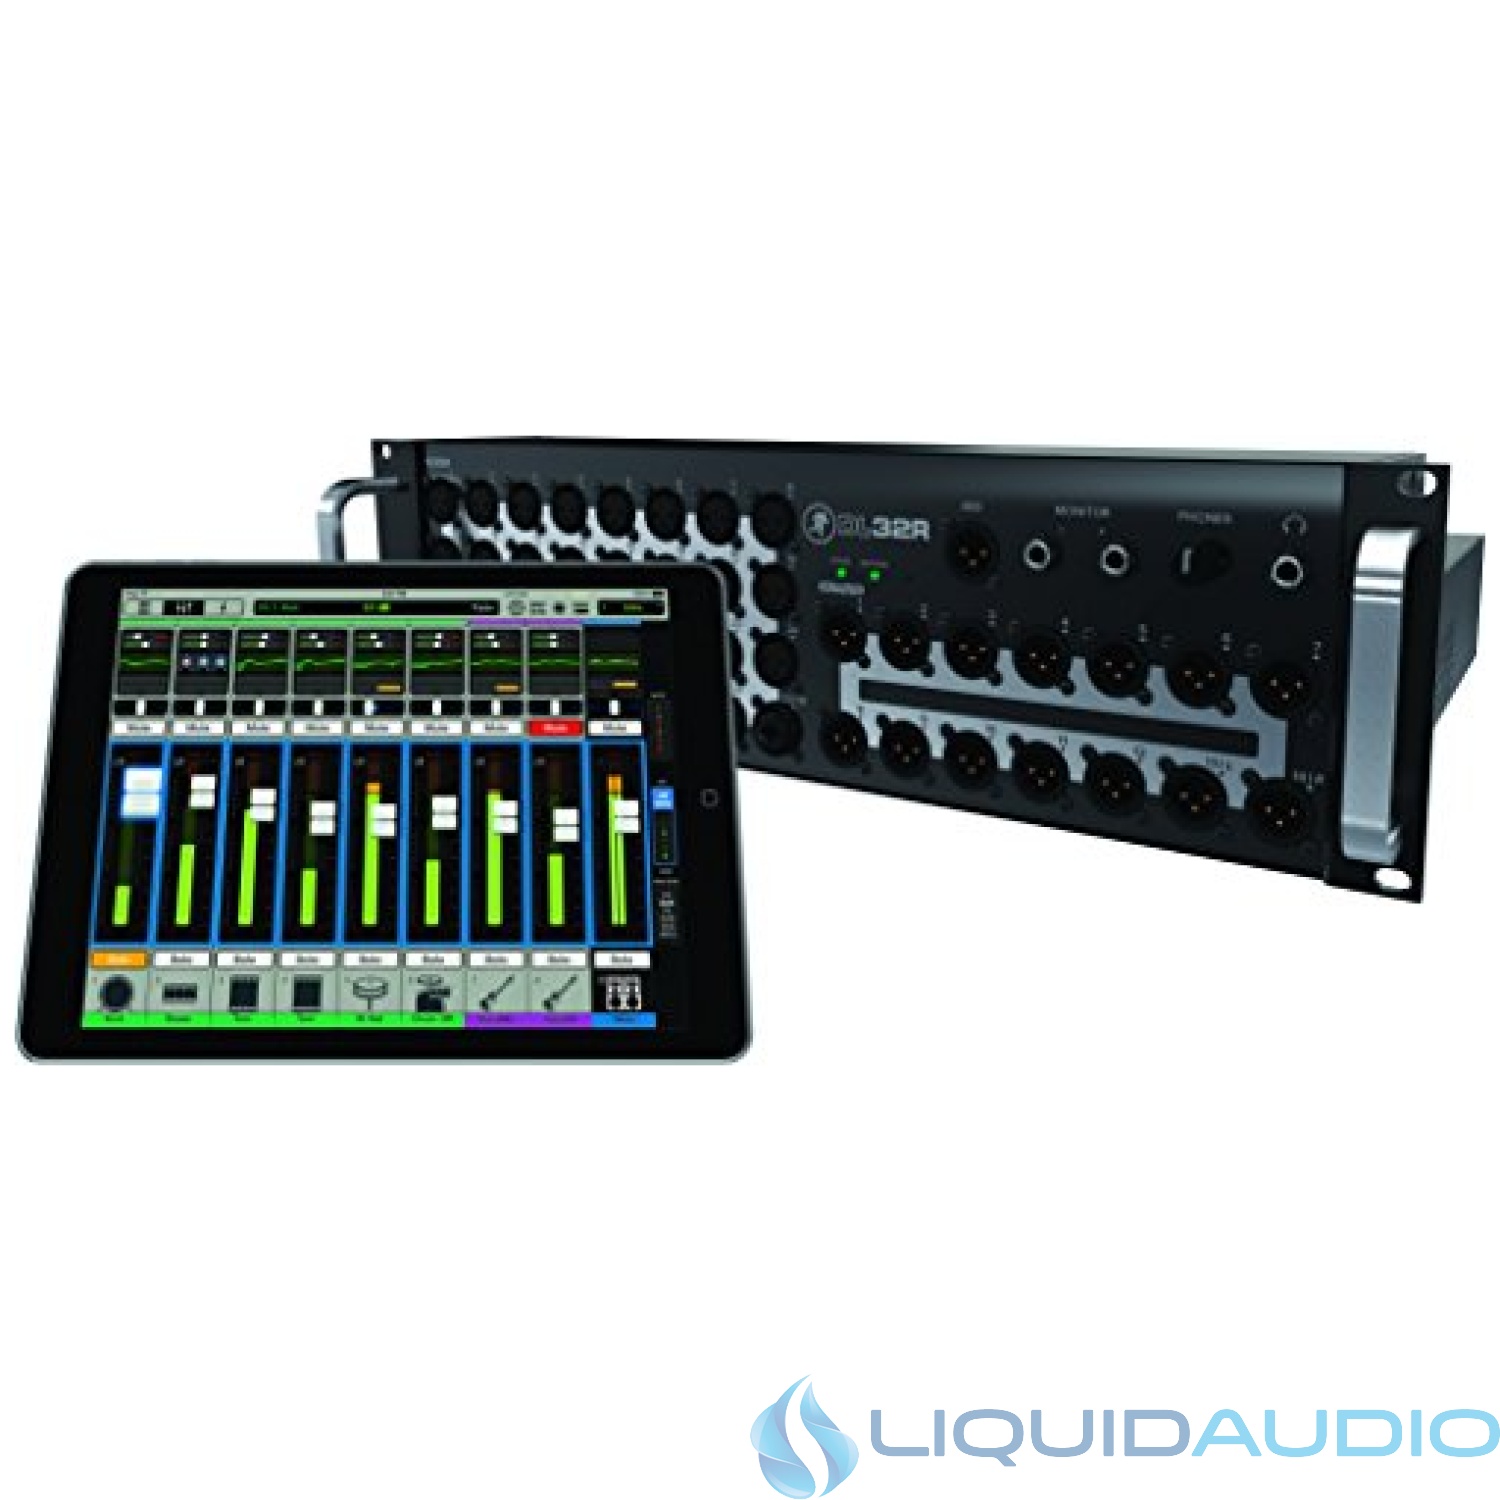 Mackie DL Series, Digital Wireless Live Sound Mixer 32-channel with iPad Control, and Onyx+mic Preamps (DL32R)